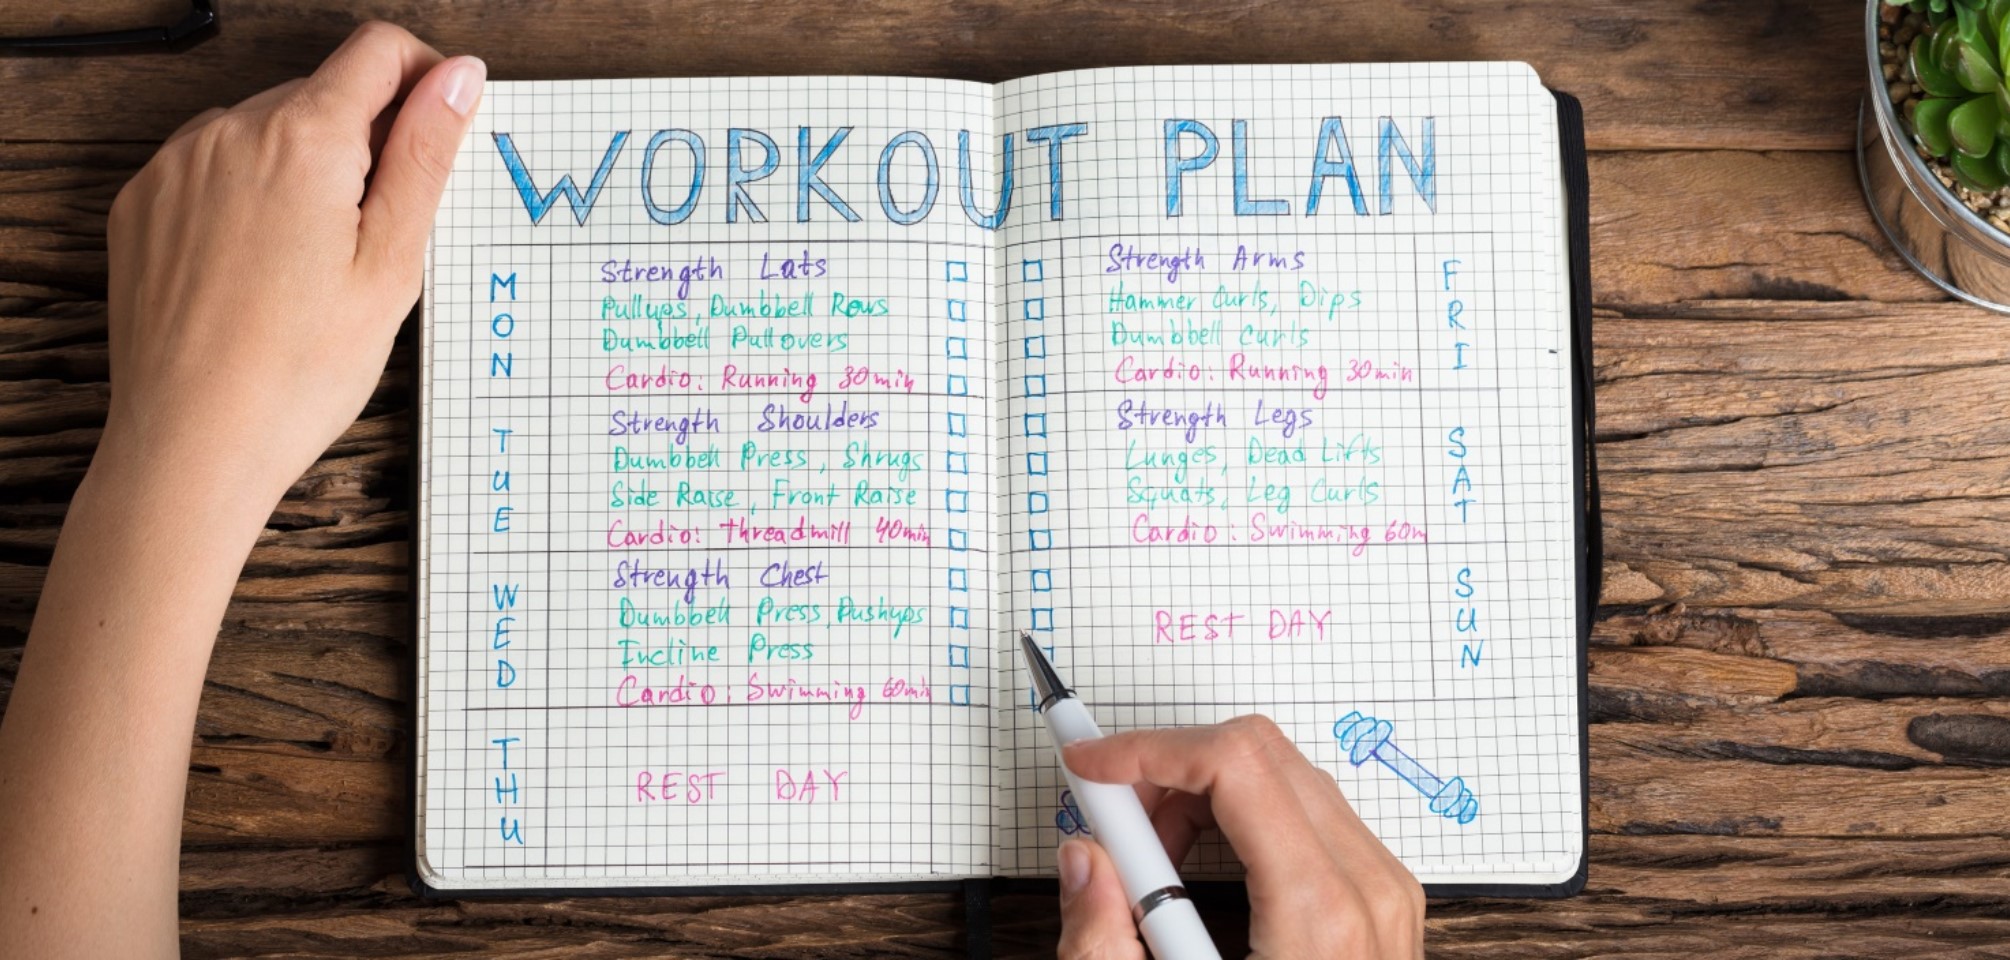 hands write into a notebook that has a workout plan outlined in it.